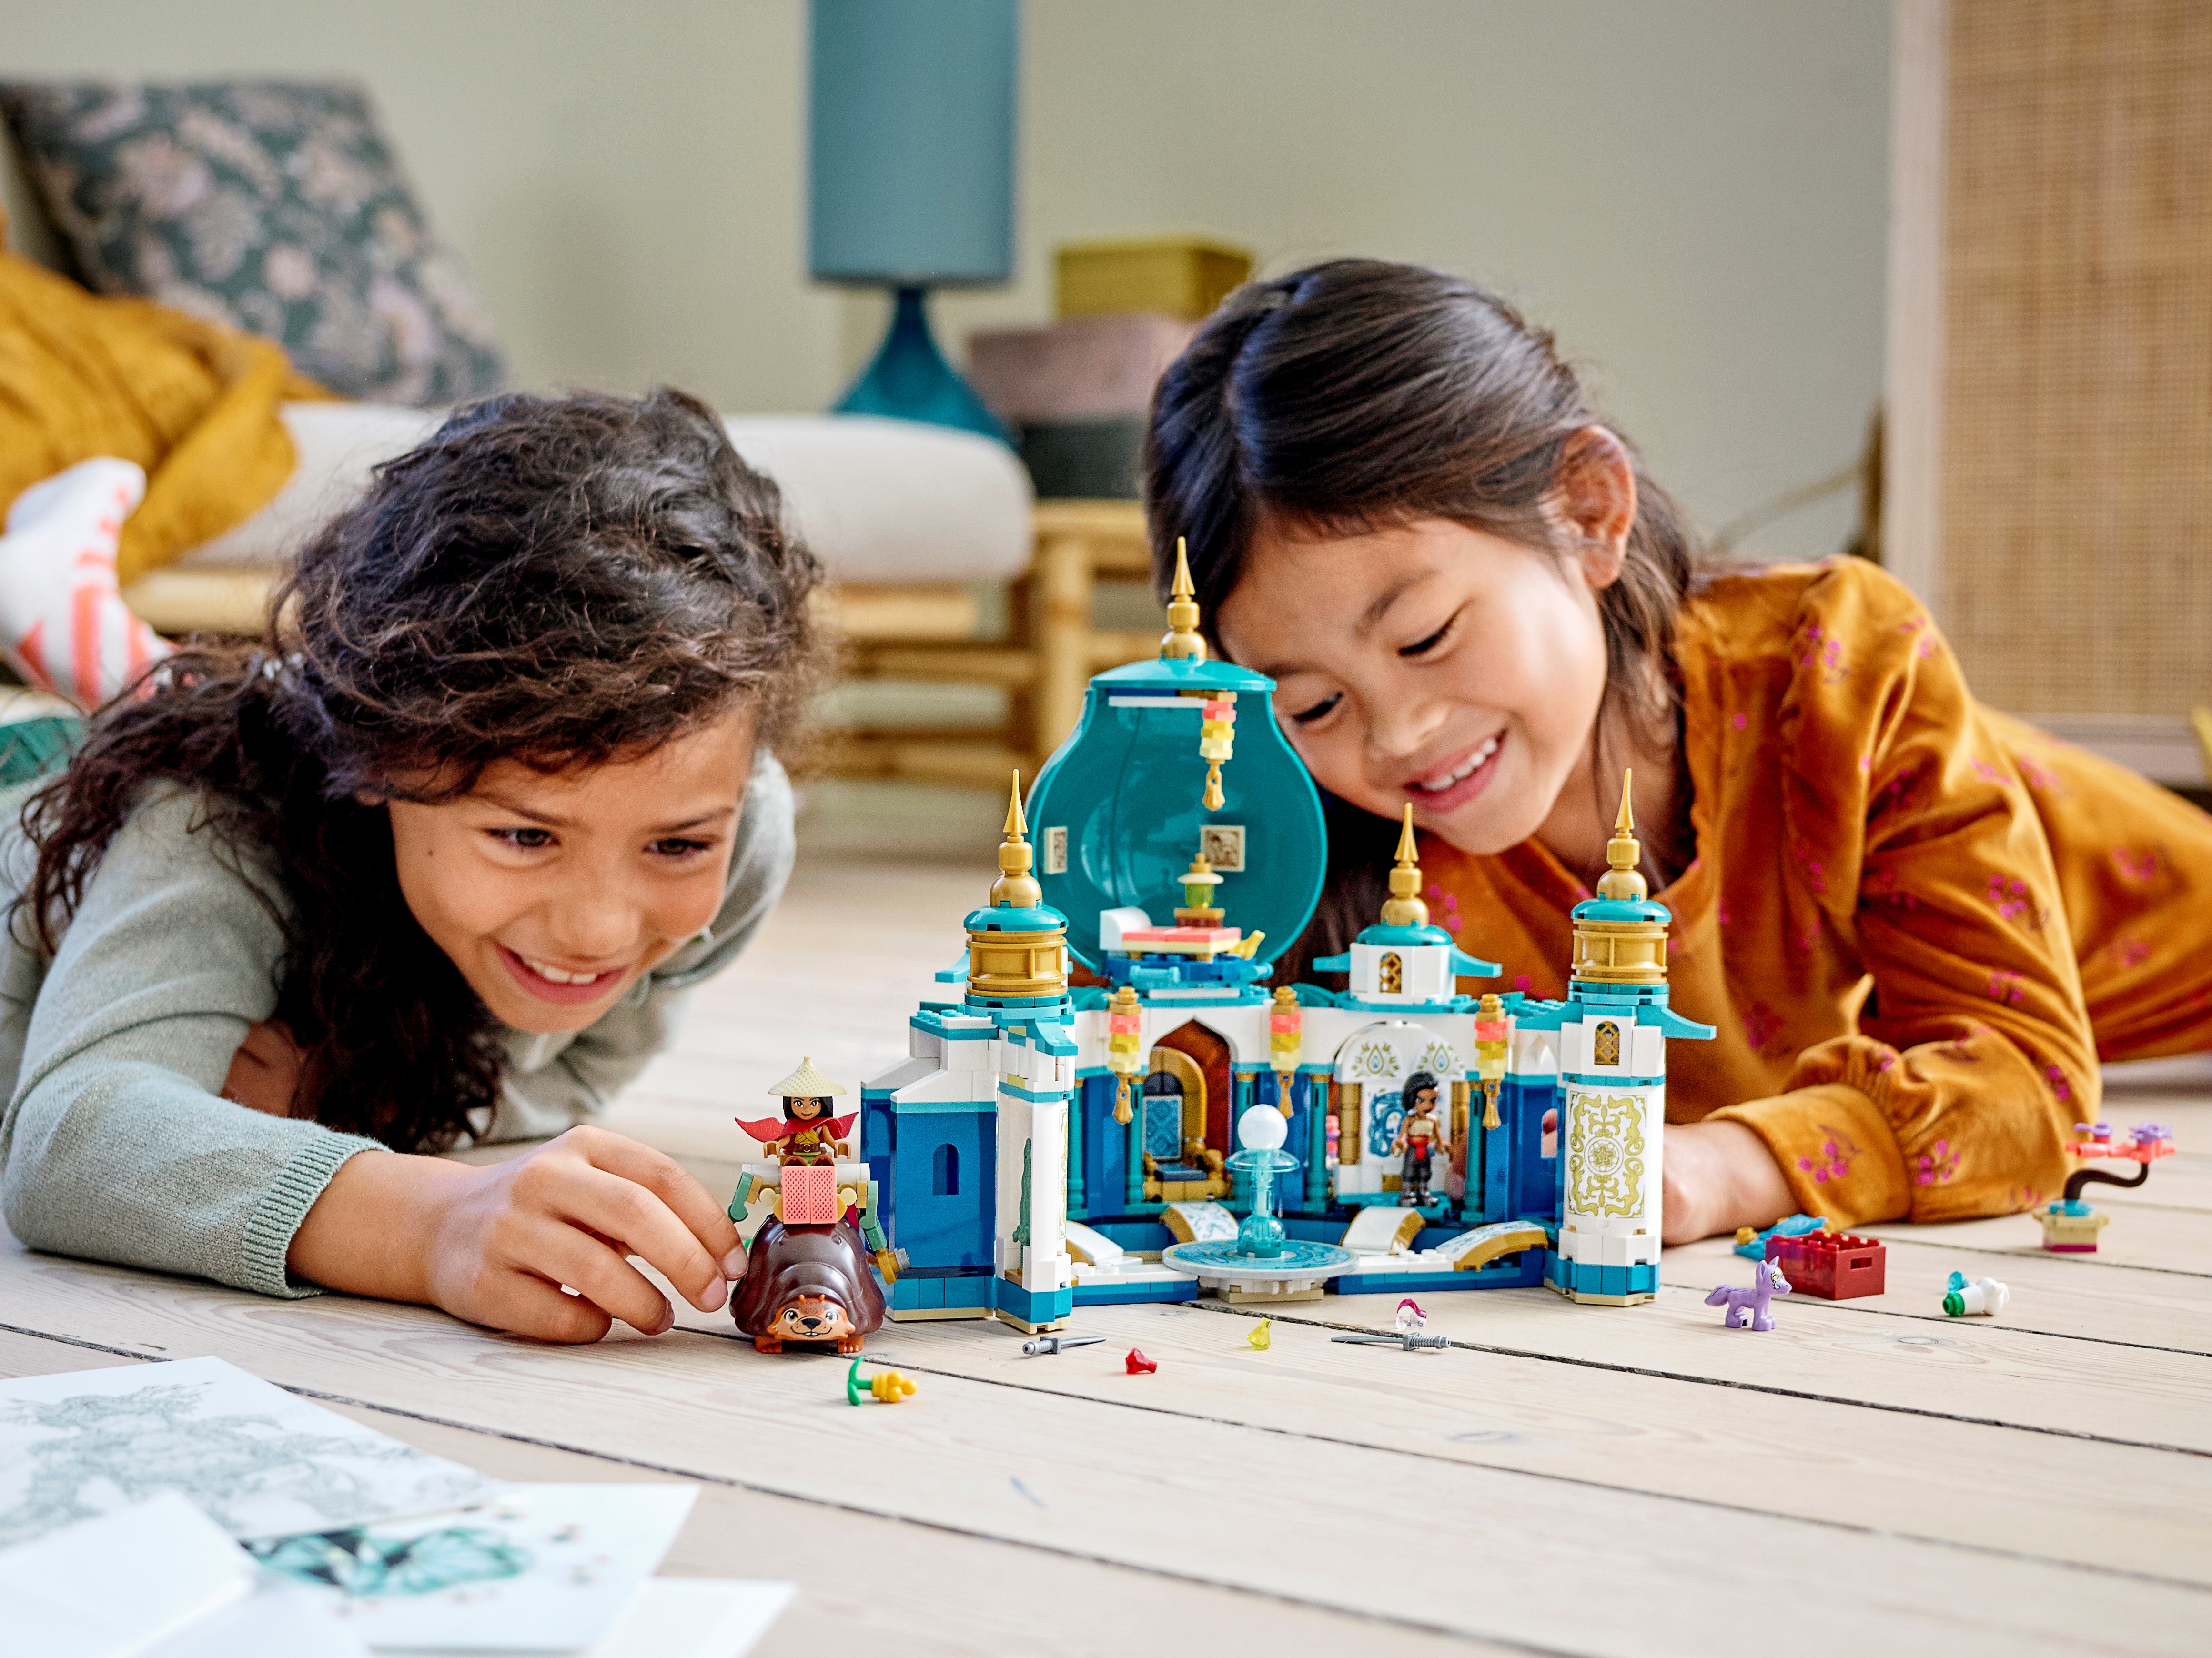 610 Pieces New 2021 LEGO Disney Raya and The Heart Palace 43181 Imaginative Toy Building Kit; Makes a Unique Disney Gift for Kids Who Love Palaces and Adventures with Disney Characters 